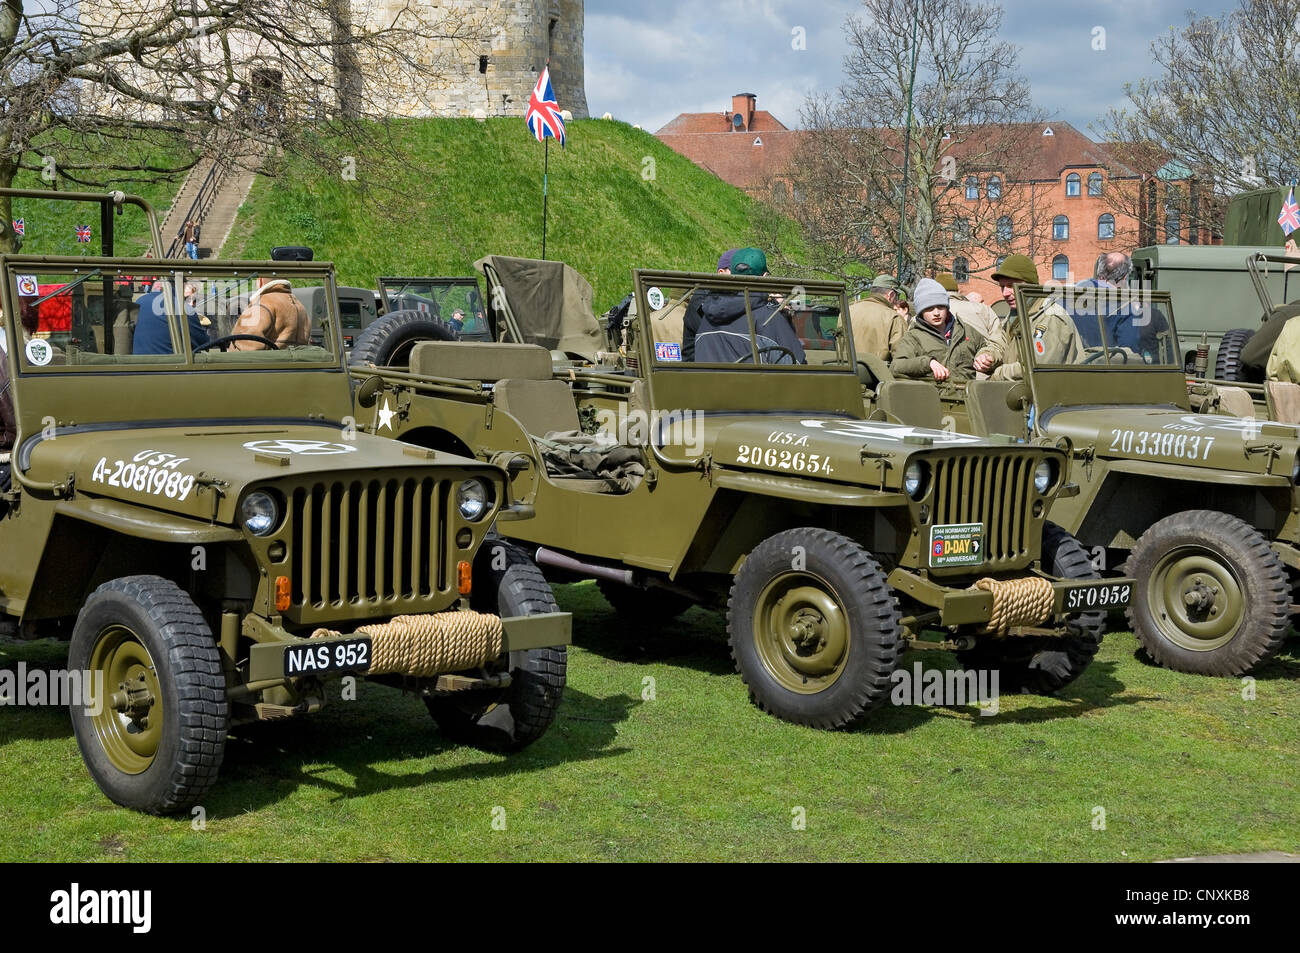 Old vintage American jeep vehicle transport jeeps at Military Vehicles rally York North Yorkshire England UK United Kingdom GB Great Britain Stock Photo